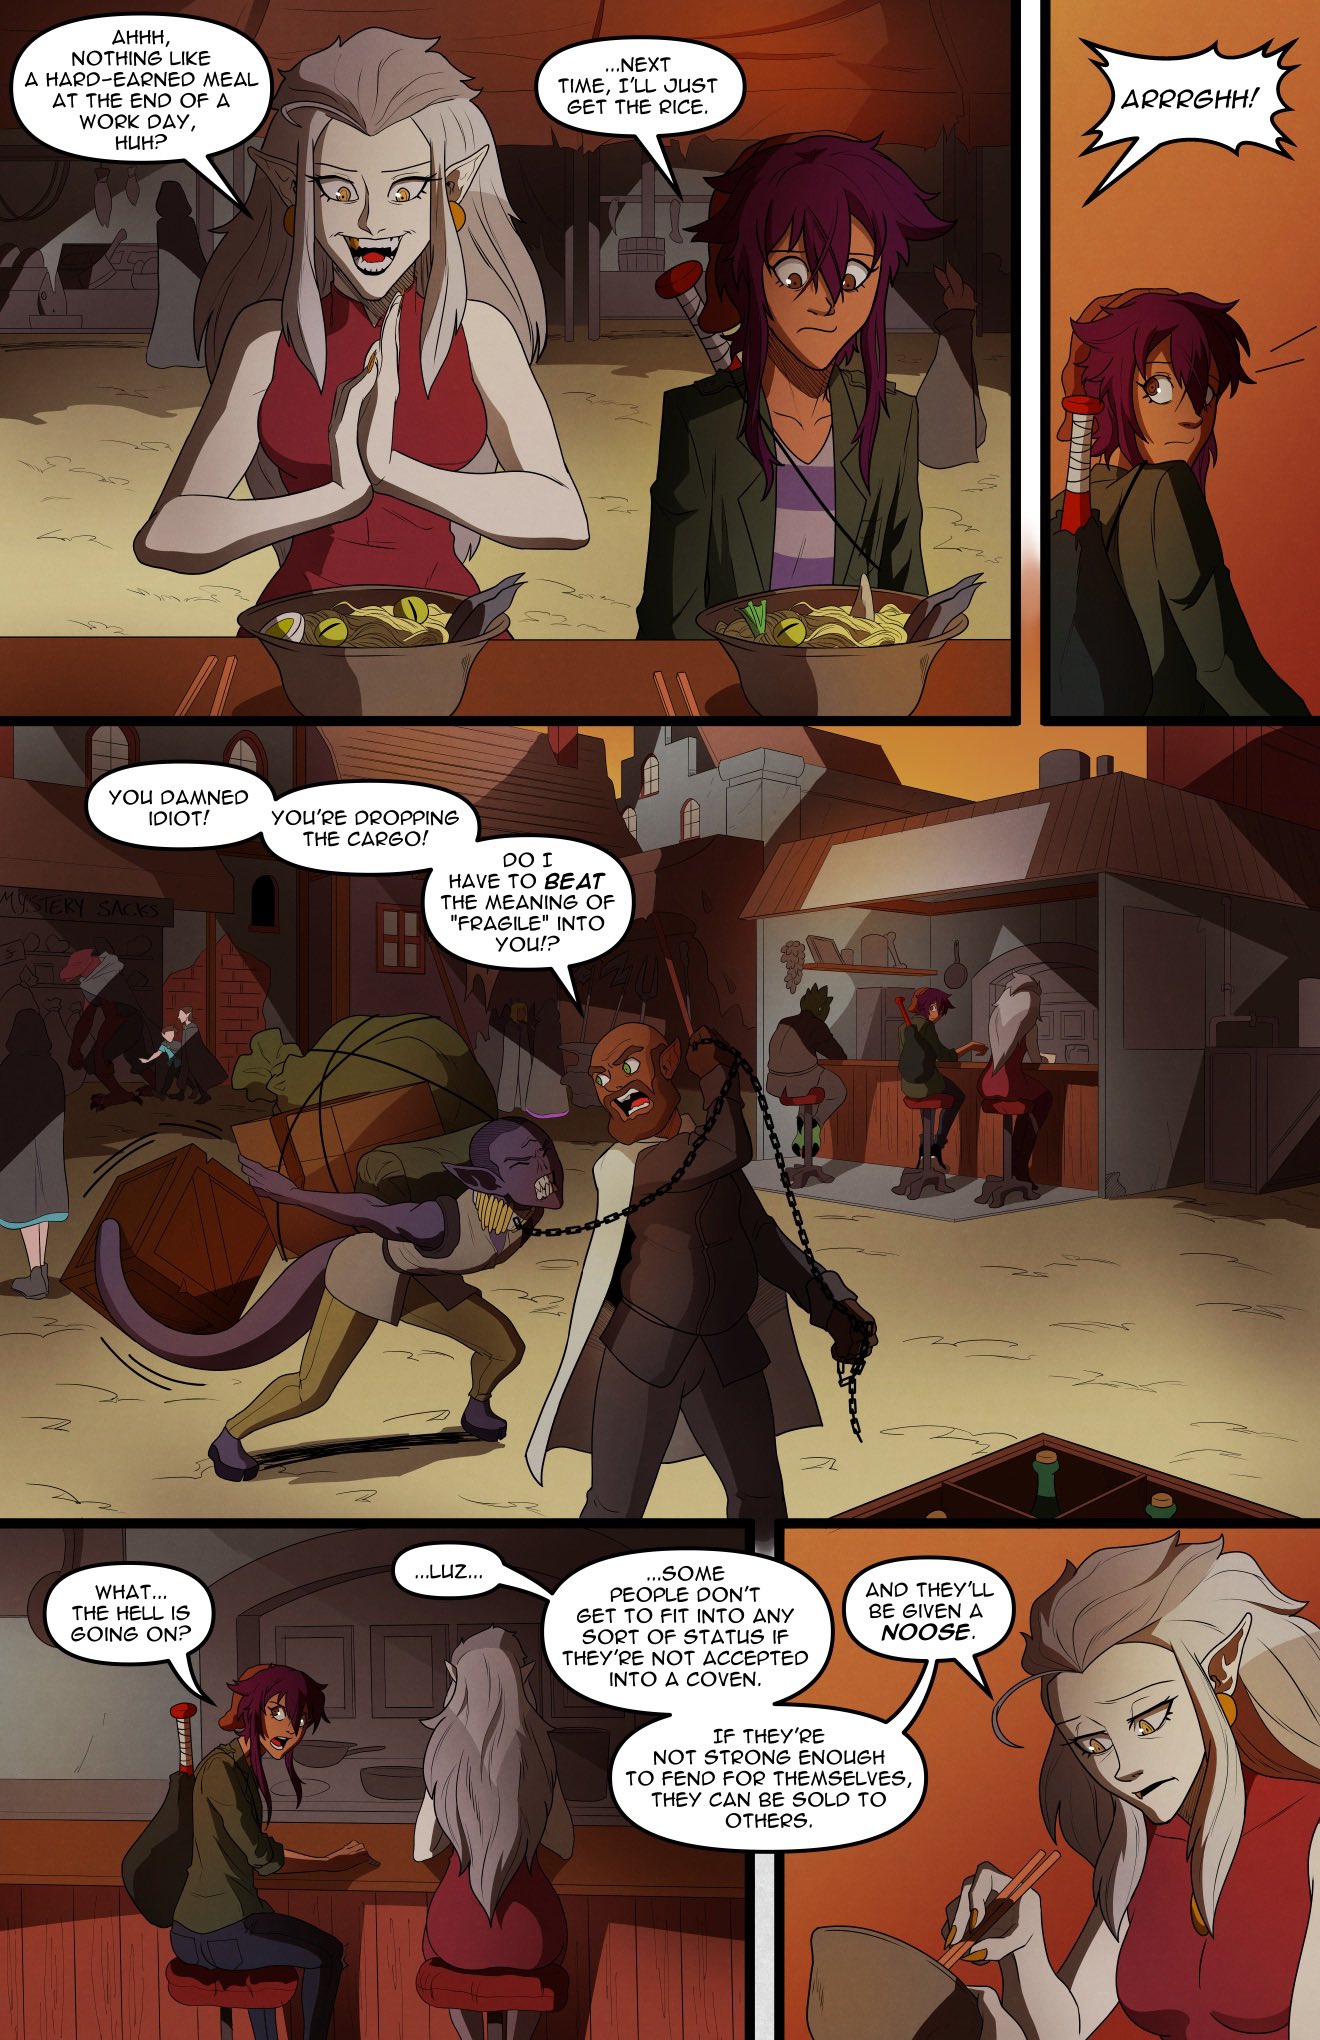 SwainArt (Commissions Open) on Twitter: "HomeLuz Arc 20 pg 1/3. A  #TheOwlHouse AU. Join my Patreon for early updates. Open for commissions.  (links in bio) https://t.co/ymVszGbWyQ" / Twitter